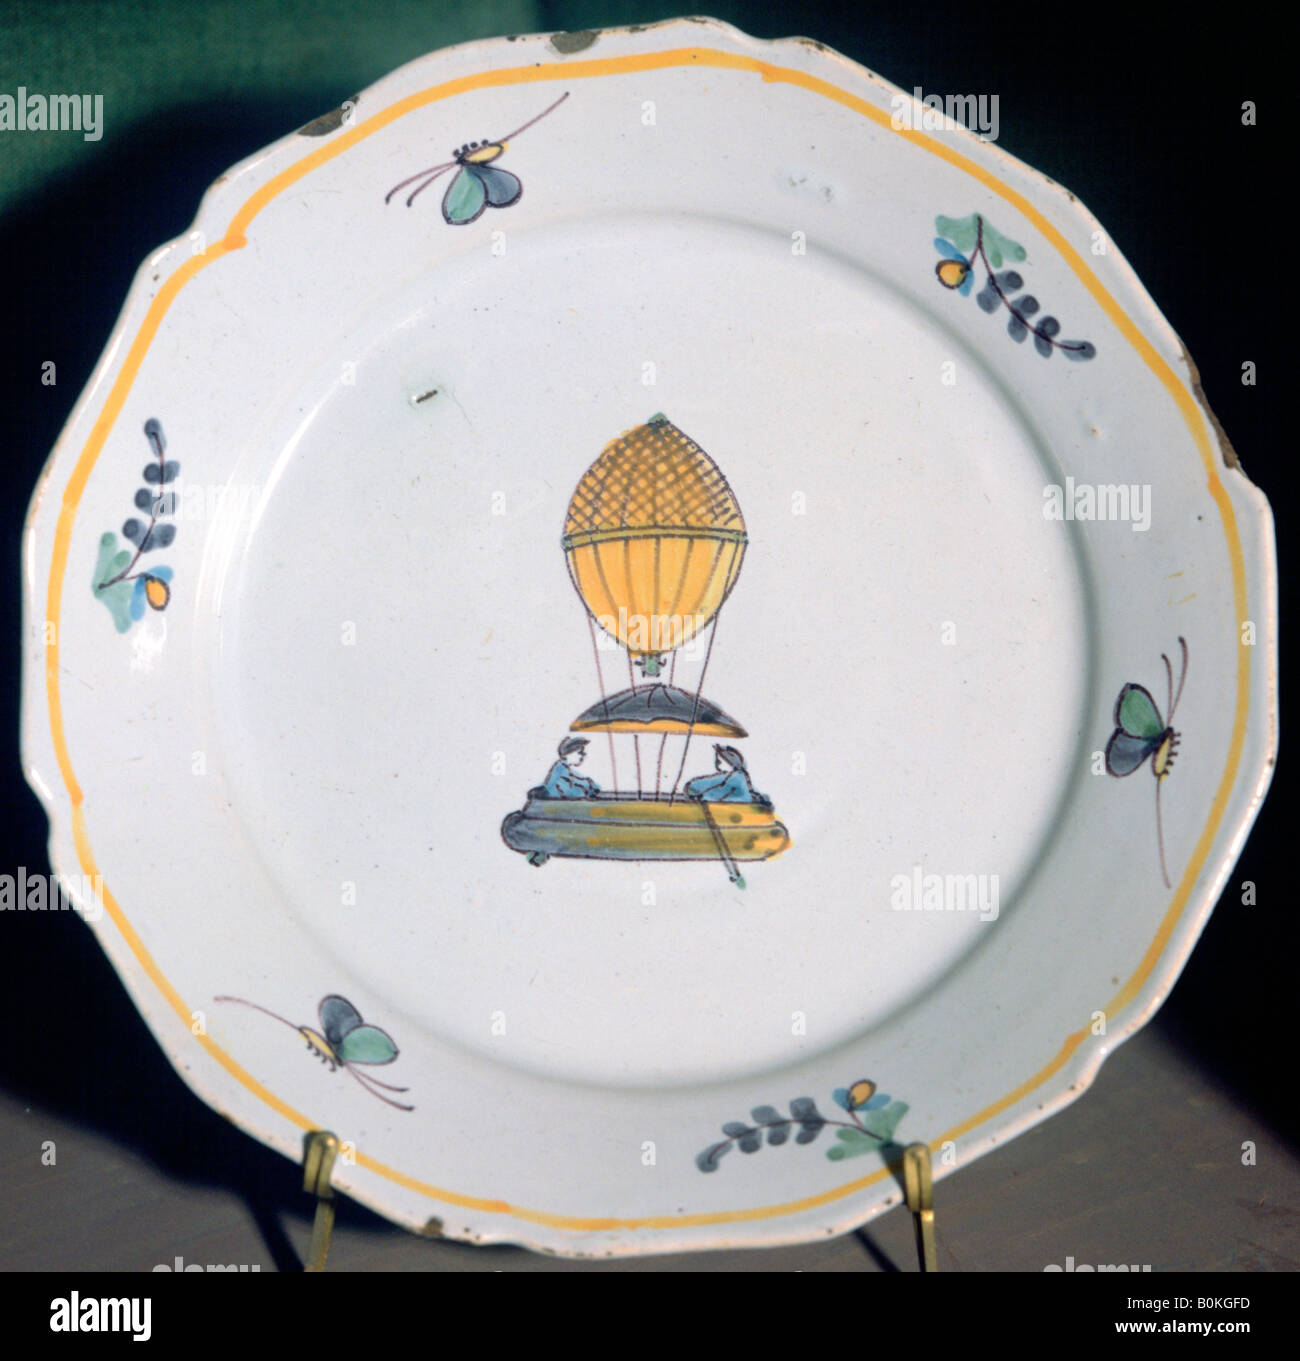 A French faience plate depicting Jean-Pierre Blanchard's balloon trip. Artist: Unknown Stock Photo